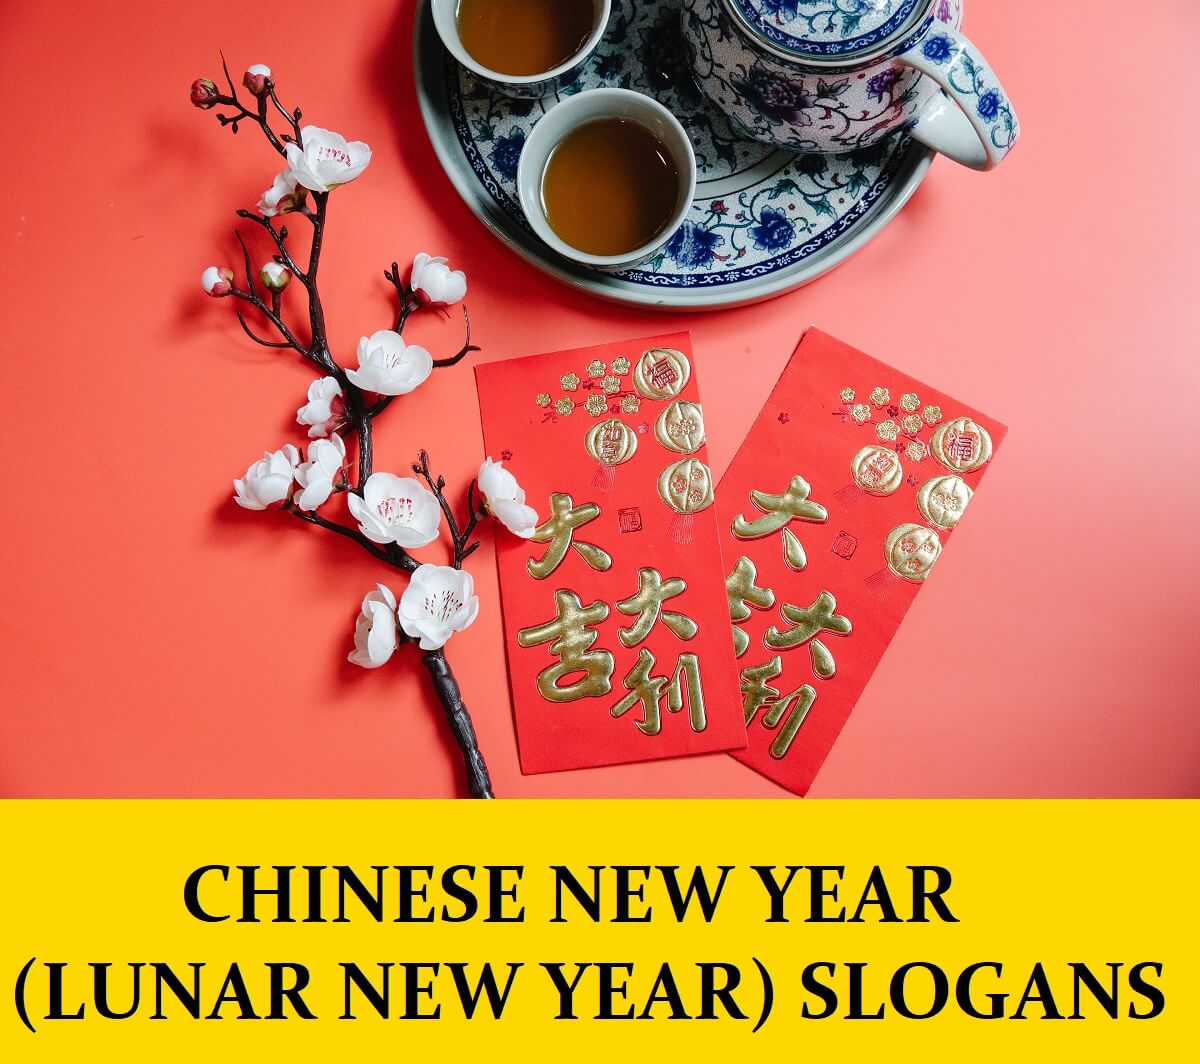 Slogans for Chinese New Year